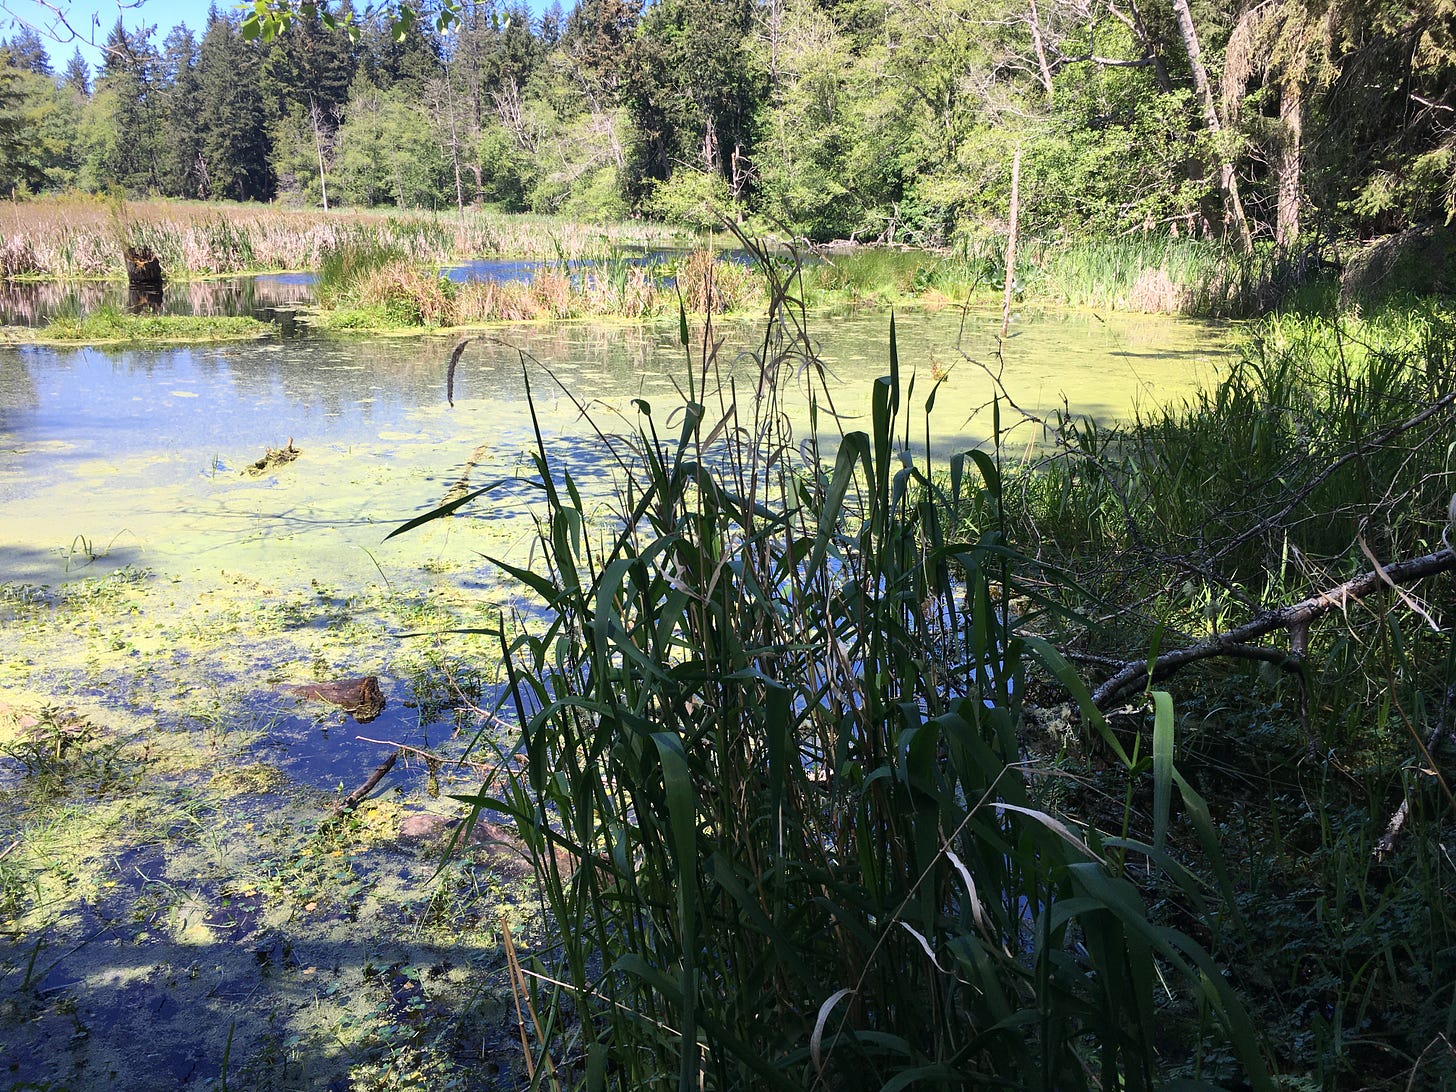 background is sun-lit marsh with brown and green grasses growing and algae on top of water, foreground is in the shade, green grasses standing tall